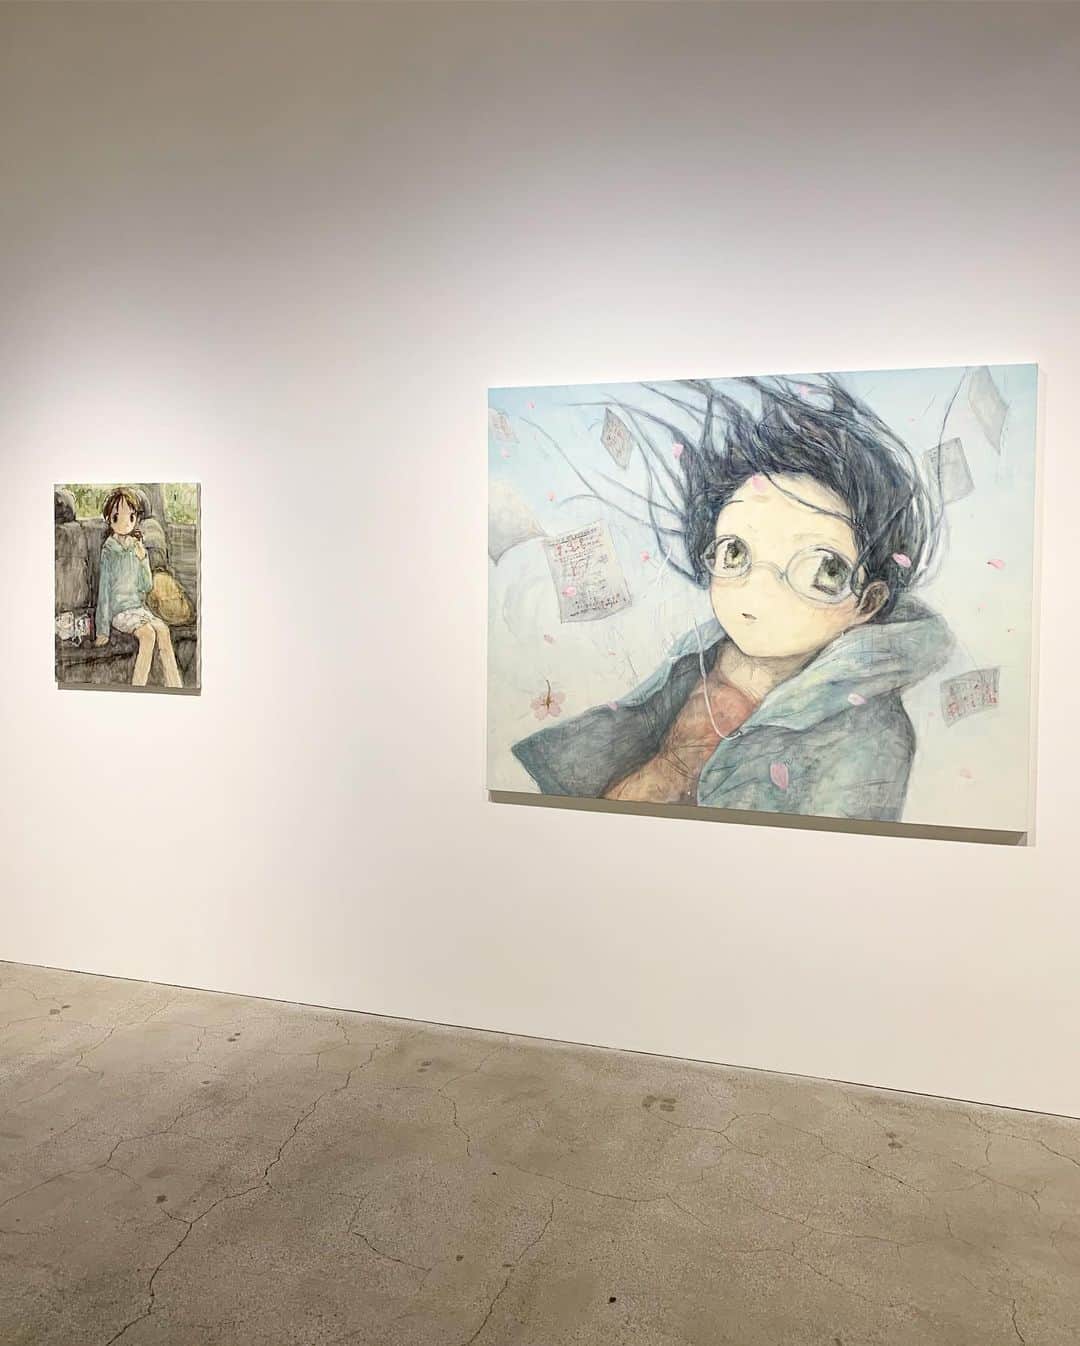 村上隆さんのインスタグラム写真 - (村上隆Instagram)「Emi Kuraya’s @emikuraya solo show opened last night. I first came to know her on Instagram when Kojiro Matsumoto @kojiro_m curated her show at the Shinjuku Ophthalmologist (Ganka) Gallery @gankagarou .I asked him to introduce us and got to meet her. She is still a senior at university and paints her works in her studio at school. Though there is no knowing what will become of her, for sure she is energetically producing works brimming with youth. Watching her continue to paint all night to complete her works leading up to the show, I couldn’t help but feel bittersweet, fresh yet painful youth in full bloom. I hope you’ll come see such paintings of youth yourself.  くらやえみさん @emikuraya の個展。昨日より始まりました。 そもそもくらやさんを知ったのは、こうじろうさん @kojiro_m がキュレーションした、新宿眼科画廊 @gankagarou での展覧会の記事をInstagramで見て、こうじろうくんに、紹介をお願いして、出会いました。 今、まだ、大学の4年生で、作品も学校のアトリエで描いていて、今後どうなるのか、サッパリわかりませんが、兎に角若さが吹き出してる作品をグングン描き続けて、展覧会の前日も完成出来ていない作品を徹夜で筆を入れて行く姿に、甘酸っぱい清々しくも切ない、青春そのものを感じました。 そんな青春絵画を、ぜひ一度見てみてください。  @kaikaikikigallery」8月3日 7時34分 - takashipom